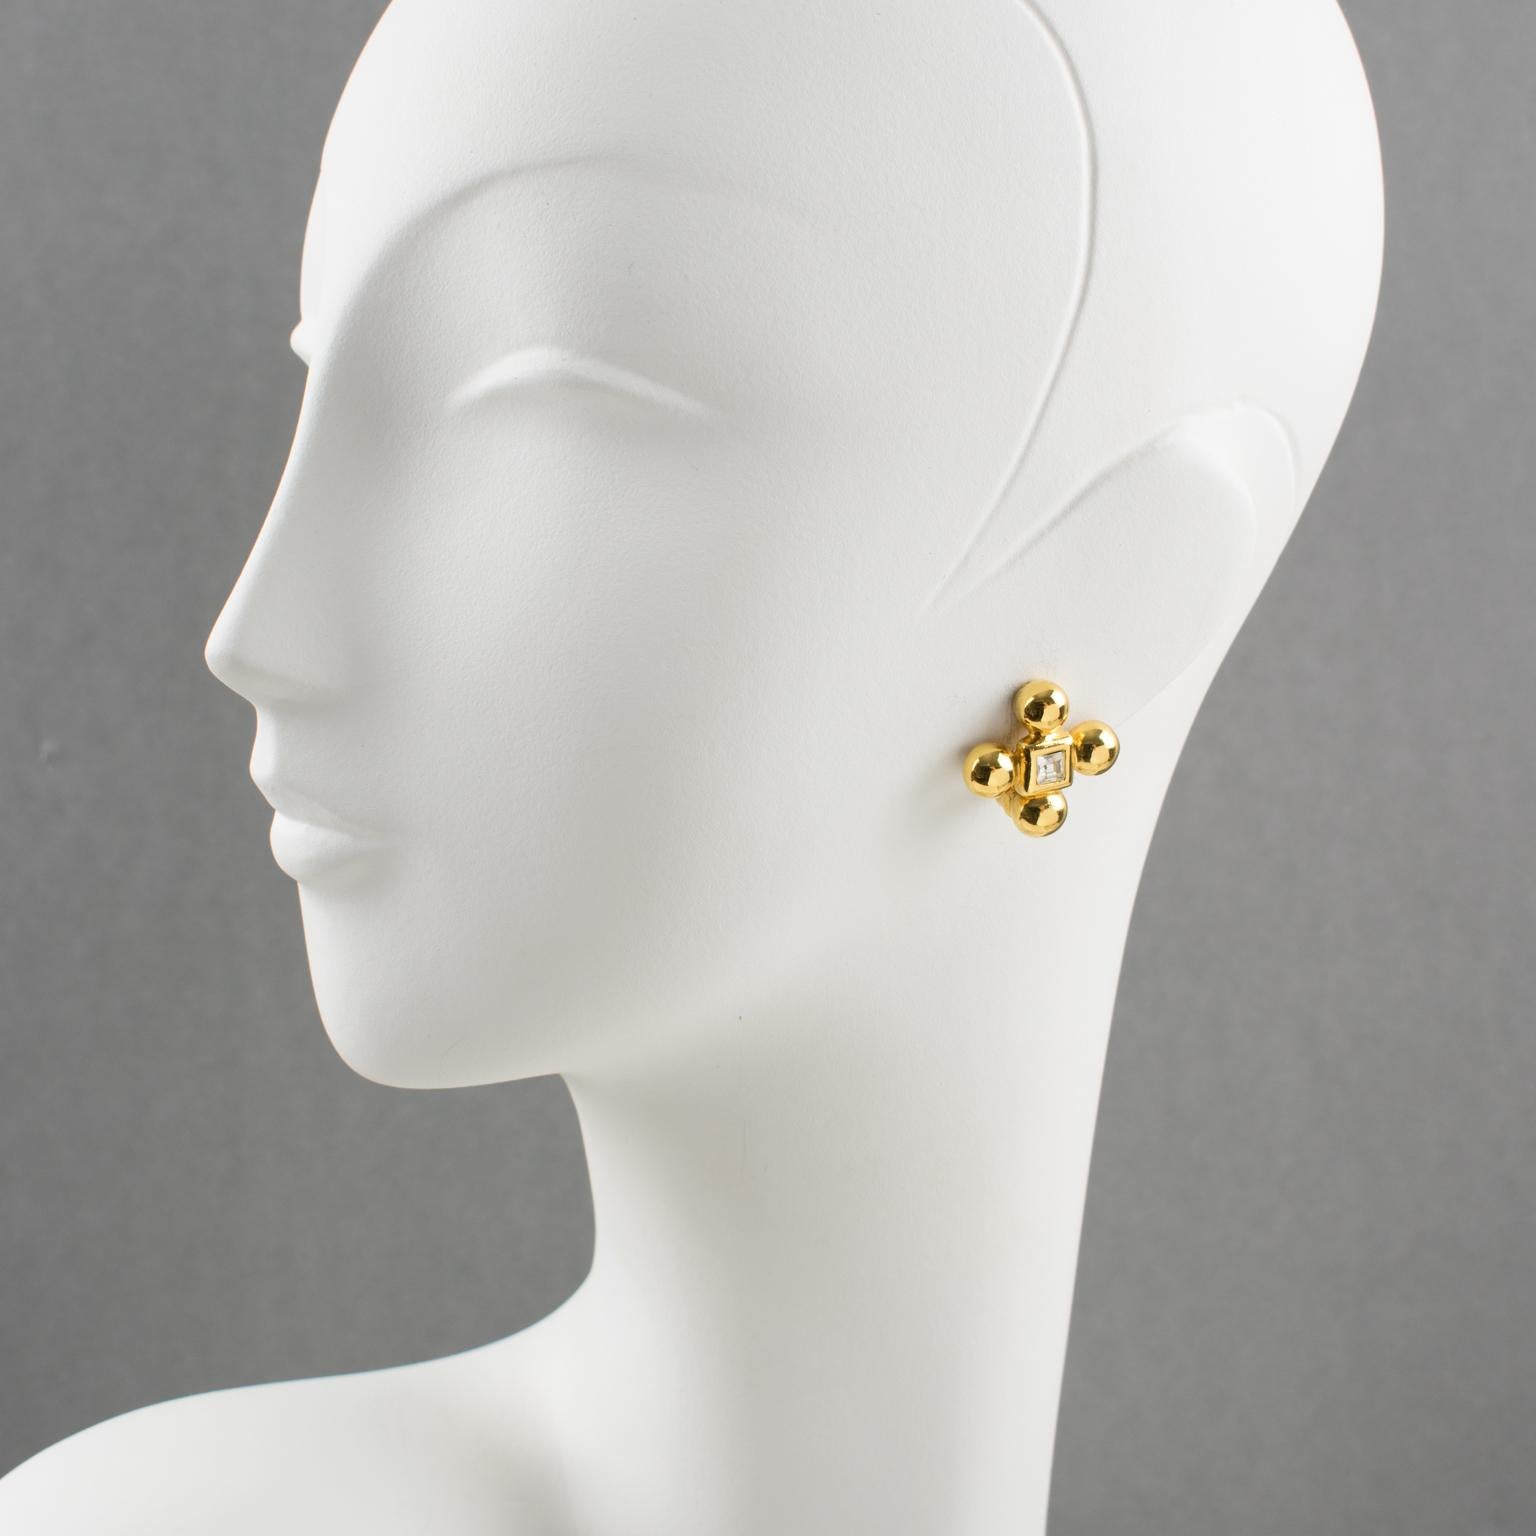 Elegant Yves Saint Laurent YSL Paris signed clip on earrings. Modernist 4 clover shape, shiny gilt metal frame topped with square crystal clear glass rhinestone. Signed at the back with YSL pierced logo on clip and engraved underside: 